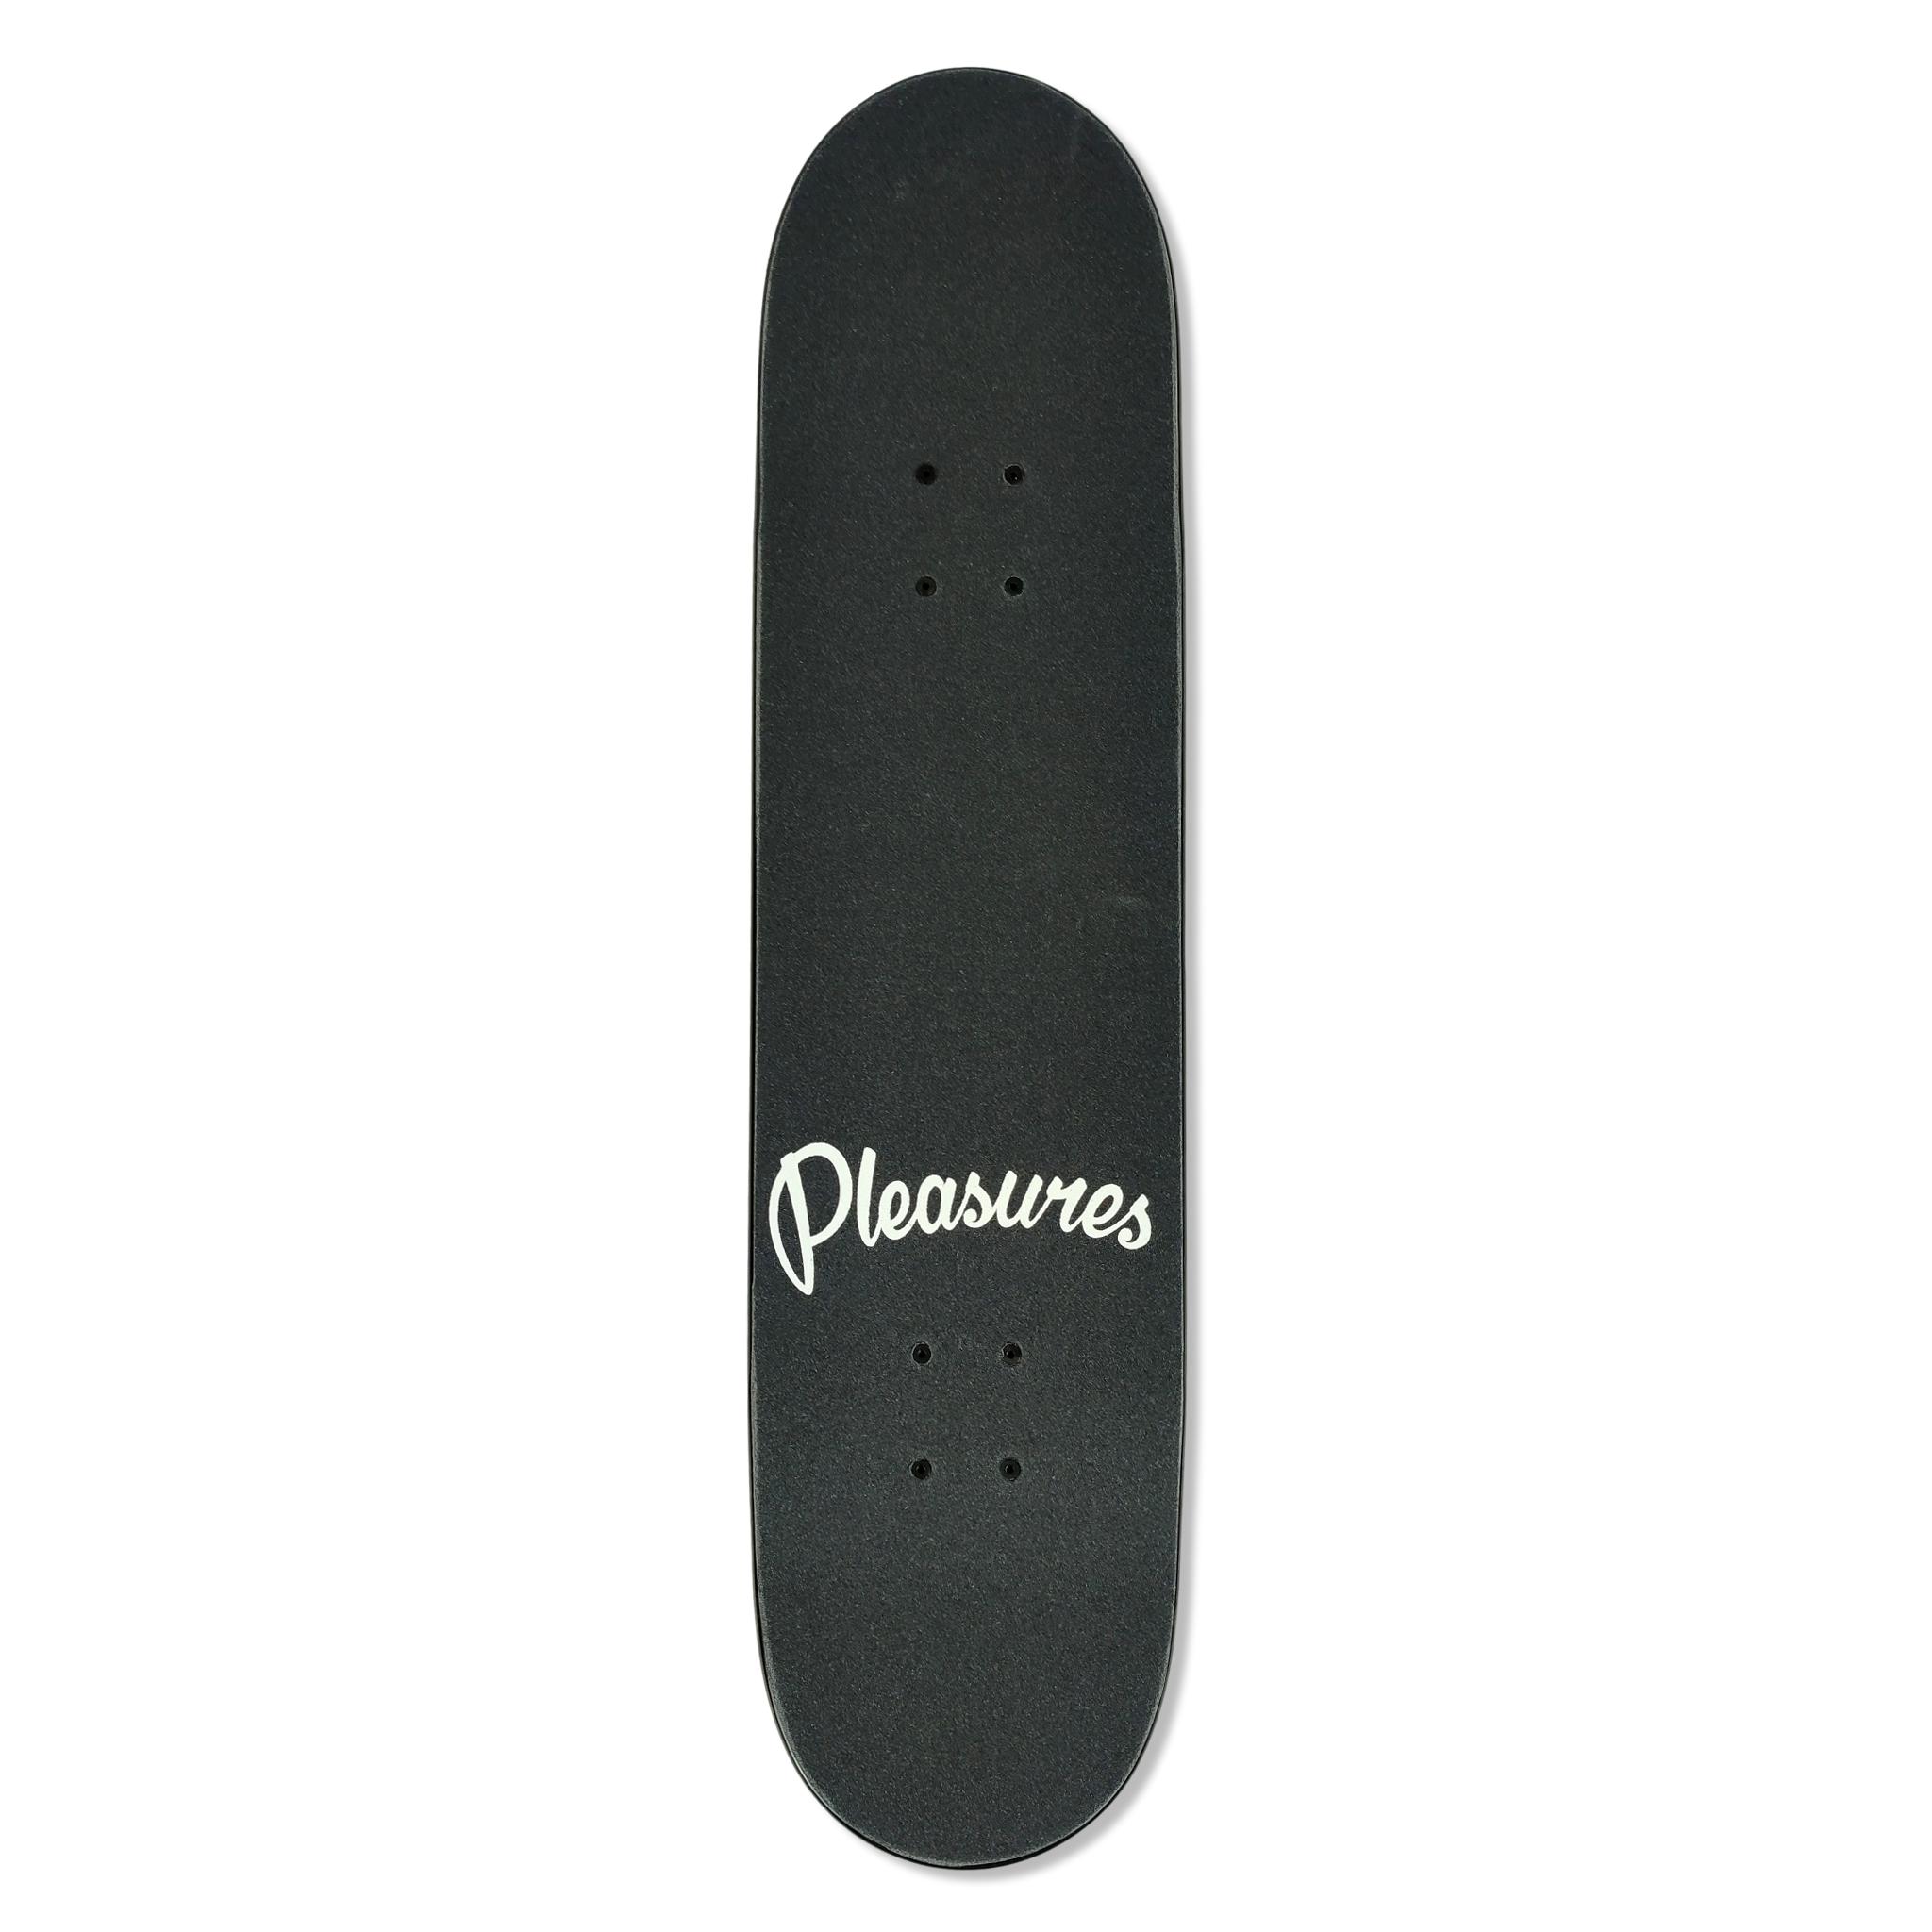 PLEASURES SKATEBOARDS COMPLETO SPACE ACE PRO 8.0